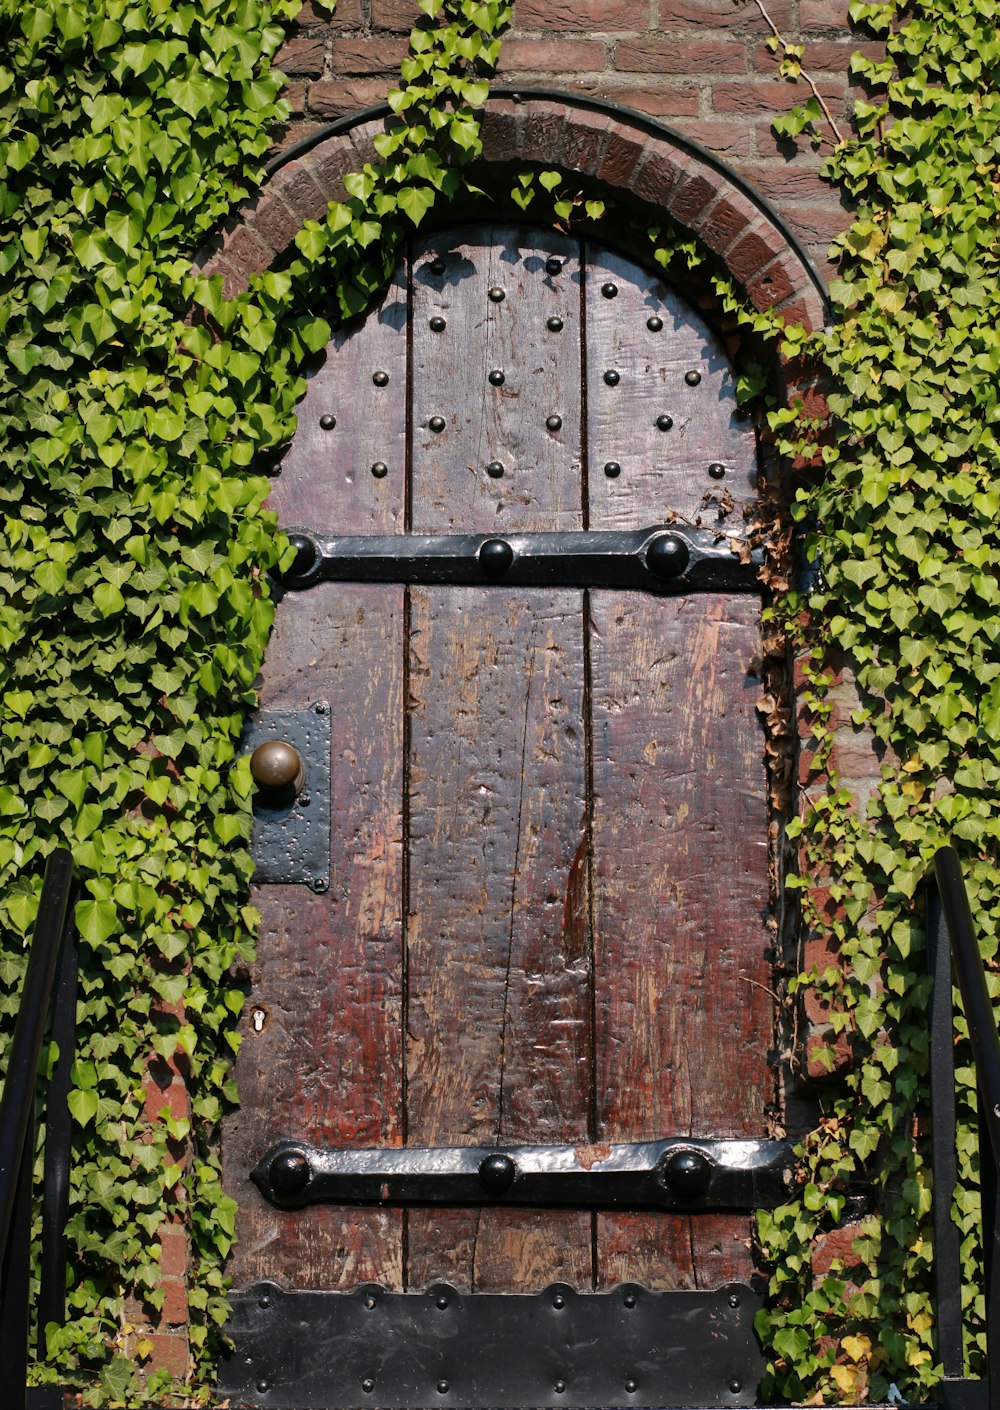 a wooden door surrounded by vines on a brick wall